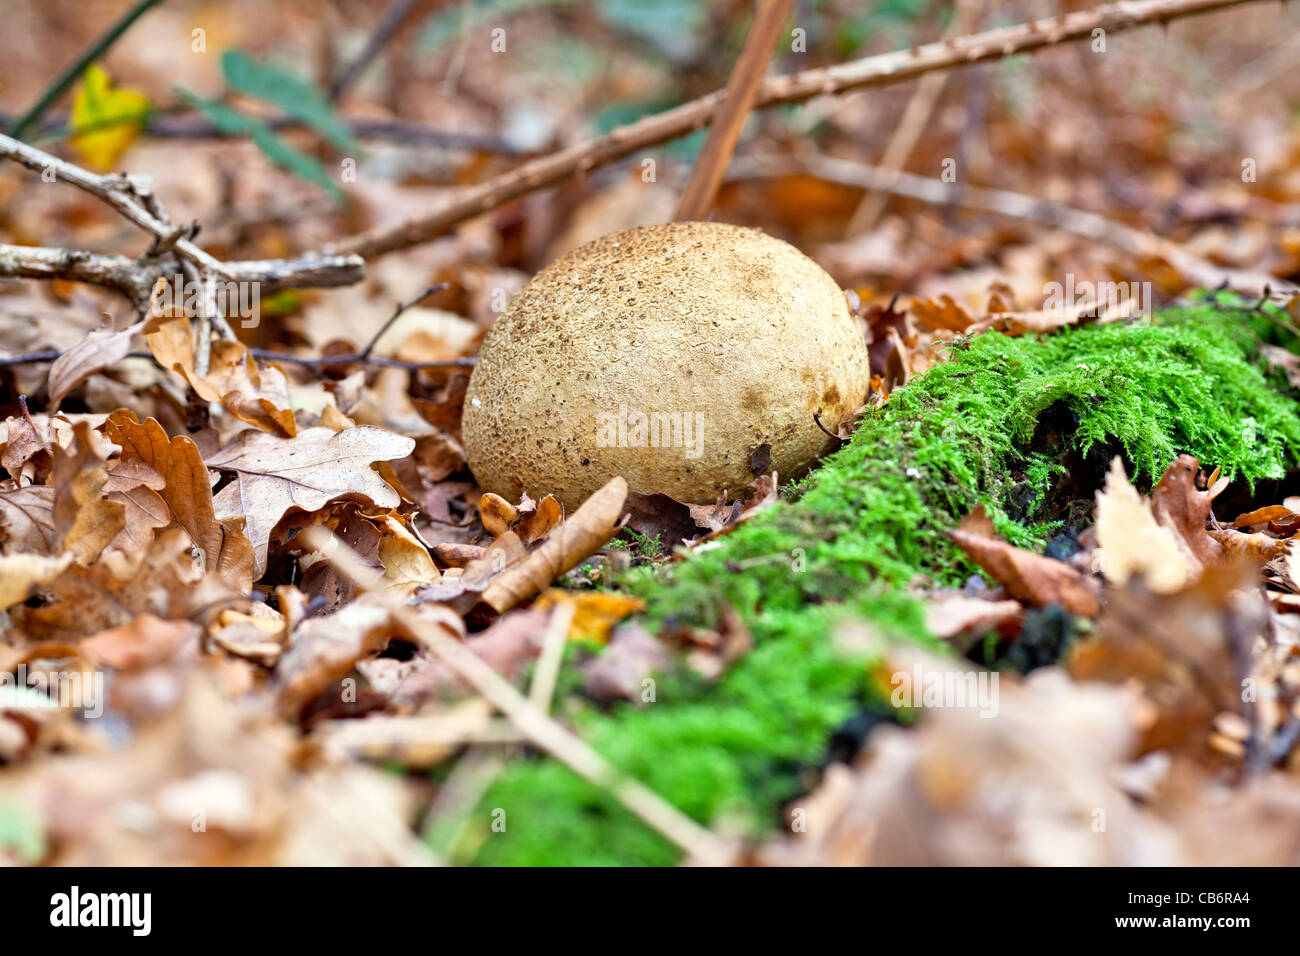 Autumn fungi - puff ball, the edible fruiting body, growing on a carpet of English oak tree leaves with green moss Stock Photo